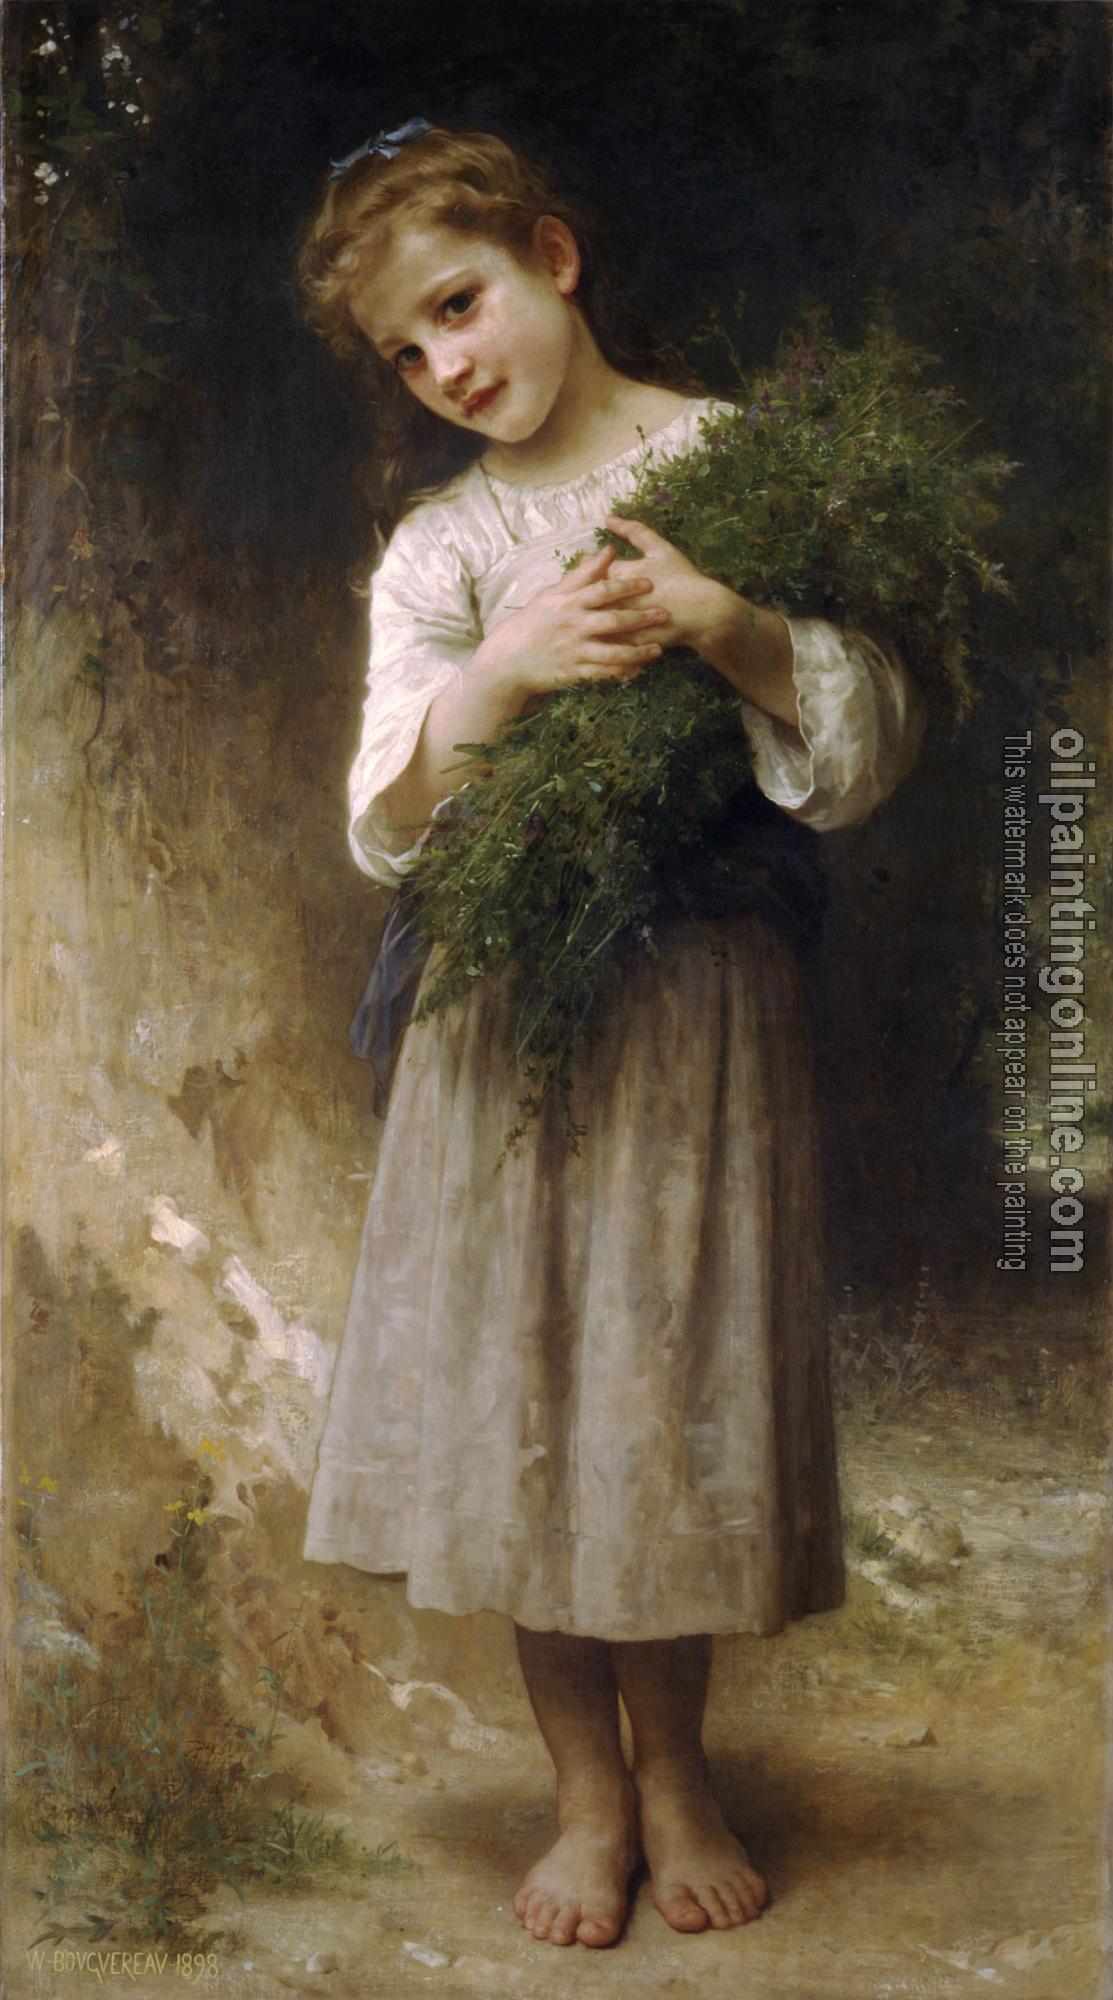 Bouguereau, William-Adolphe - Retour des champs, Returned from the fields